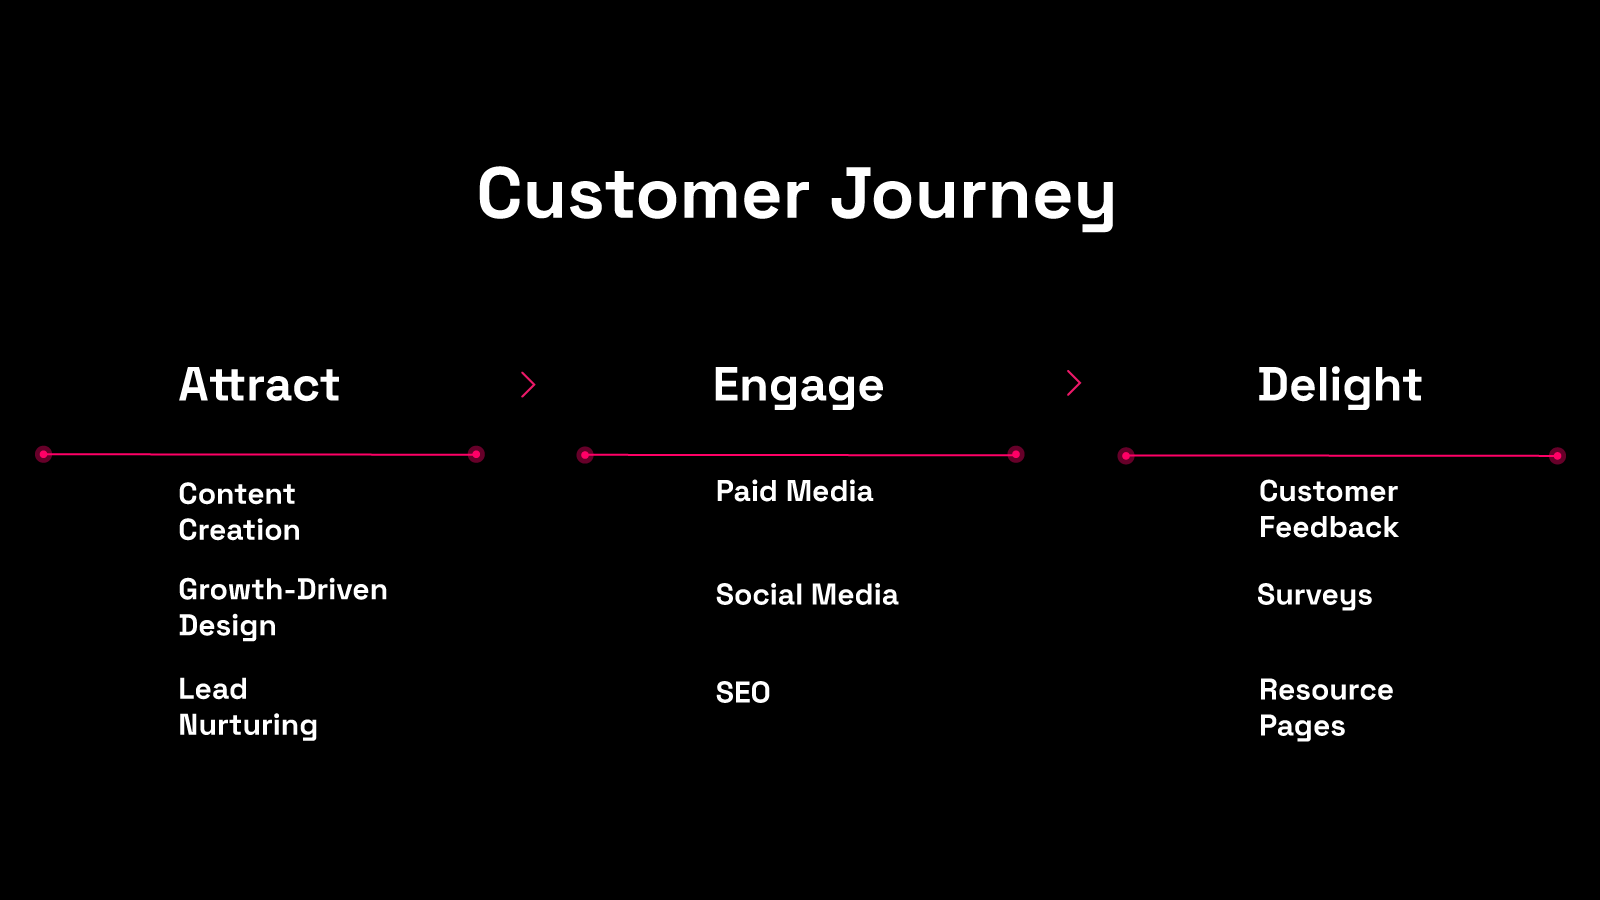 Three stages of customer journey